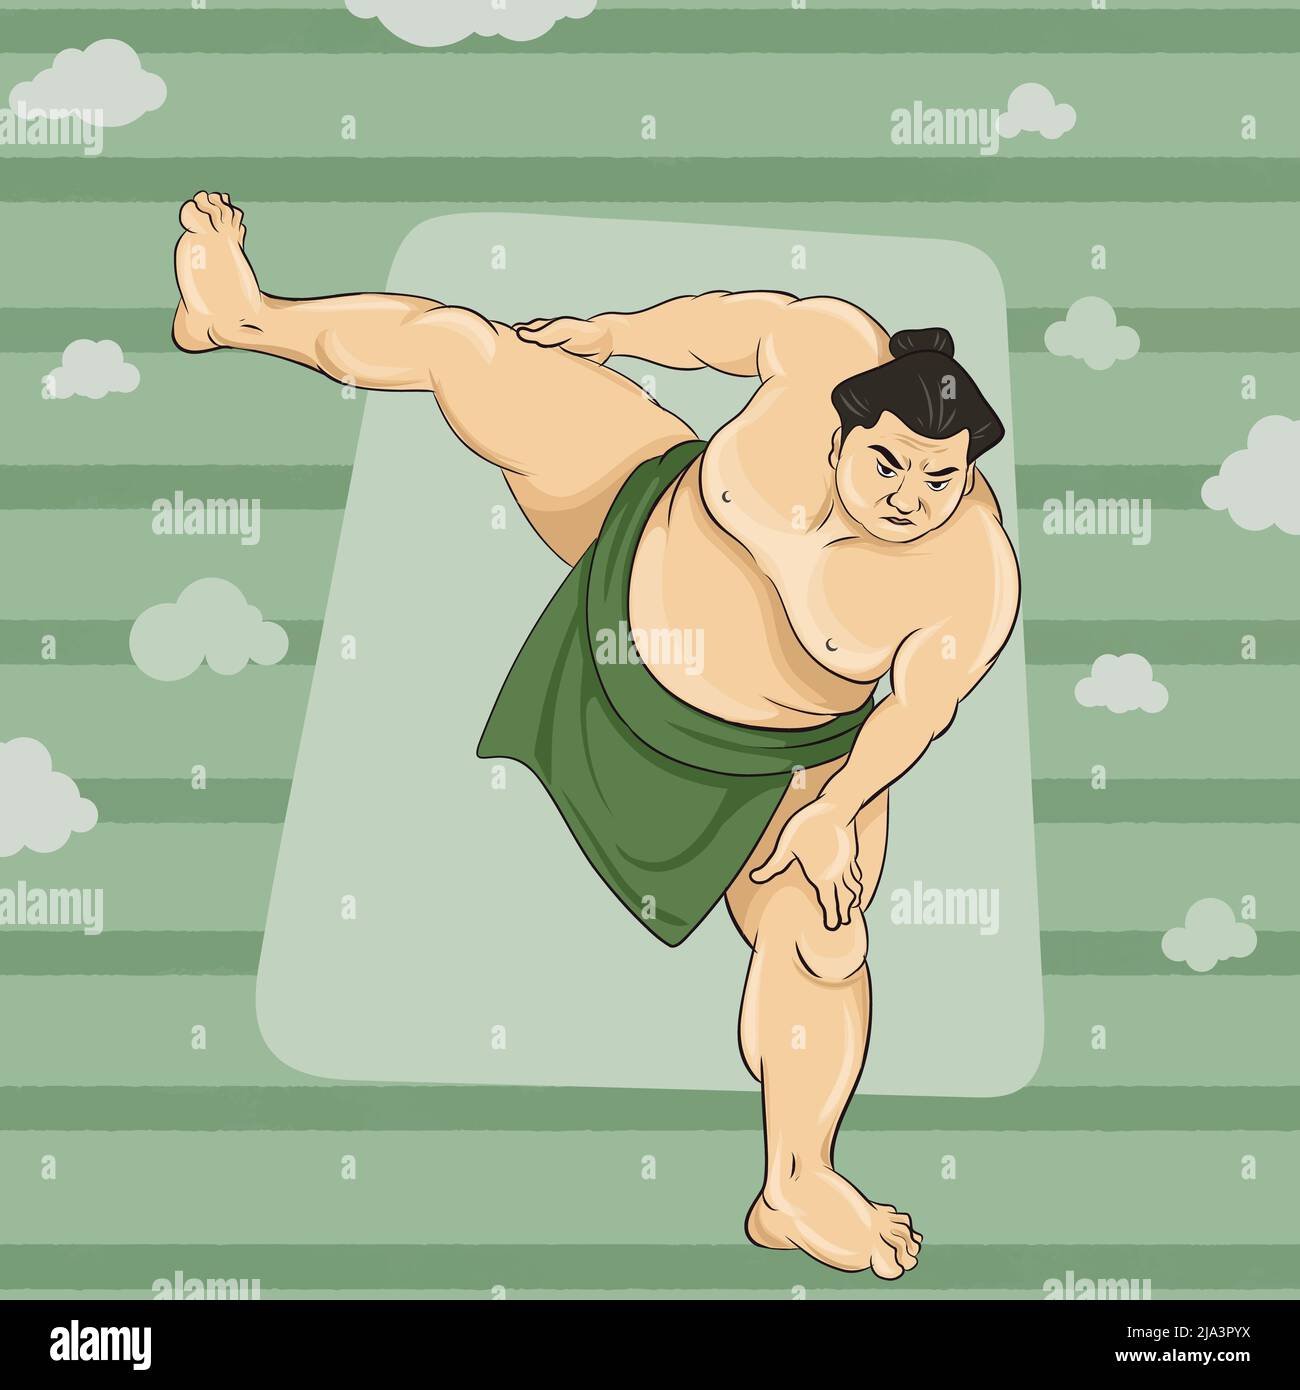 Sumo Wrestler standing in an aggressive stance with one leg up. Big Tall Huge Angry Man. Japanese Sport. Stock Vector